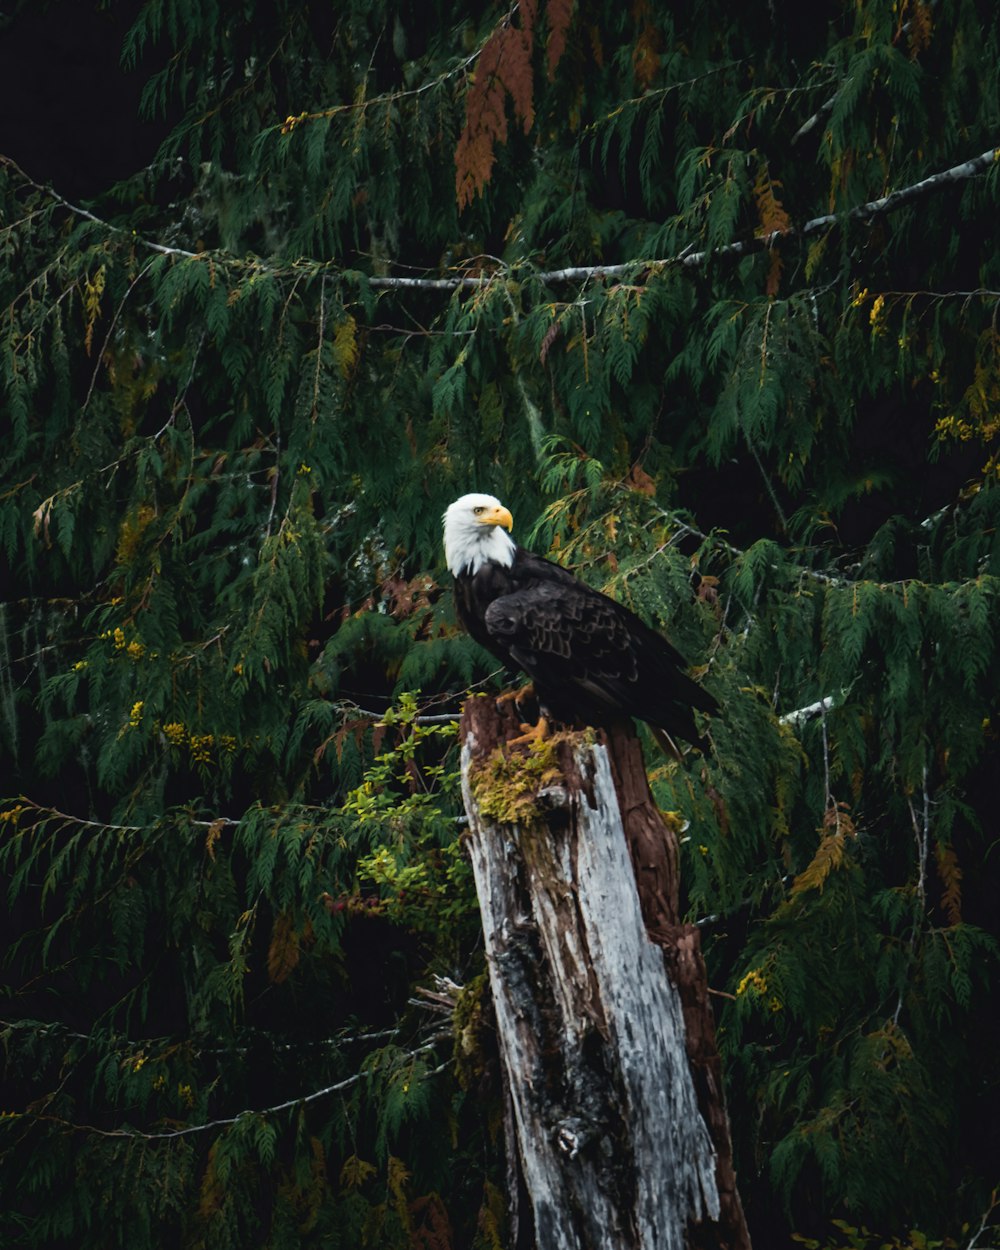 Bald eagle perched on tree trunk by trees